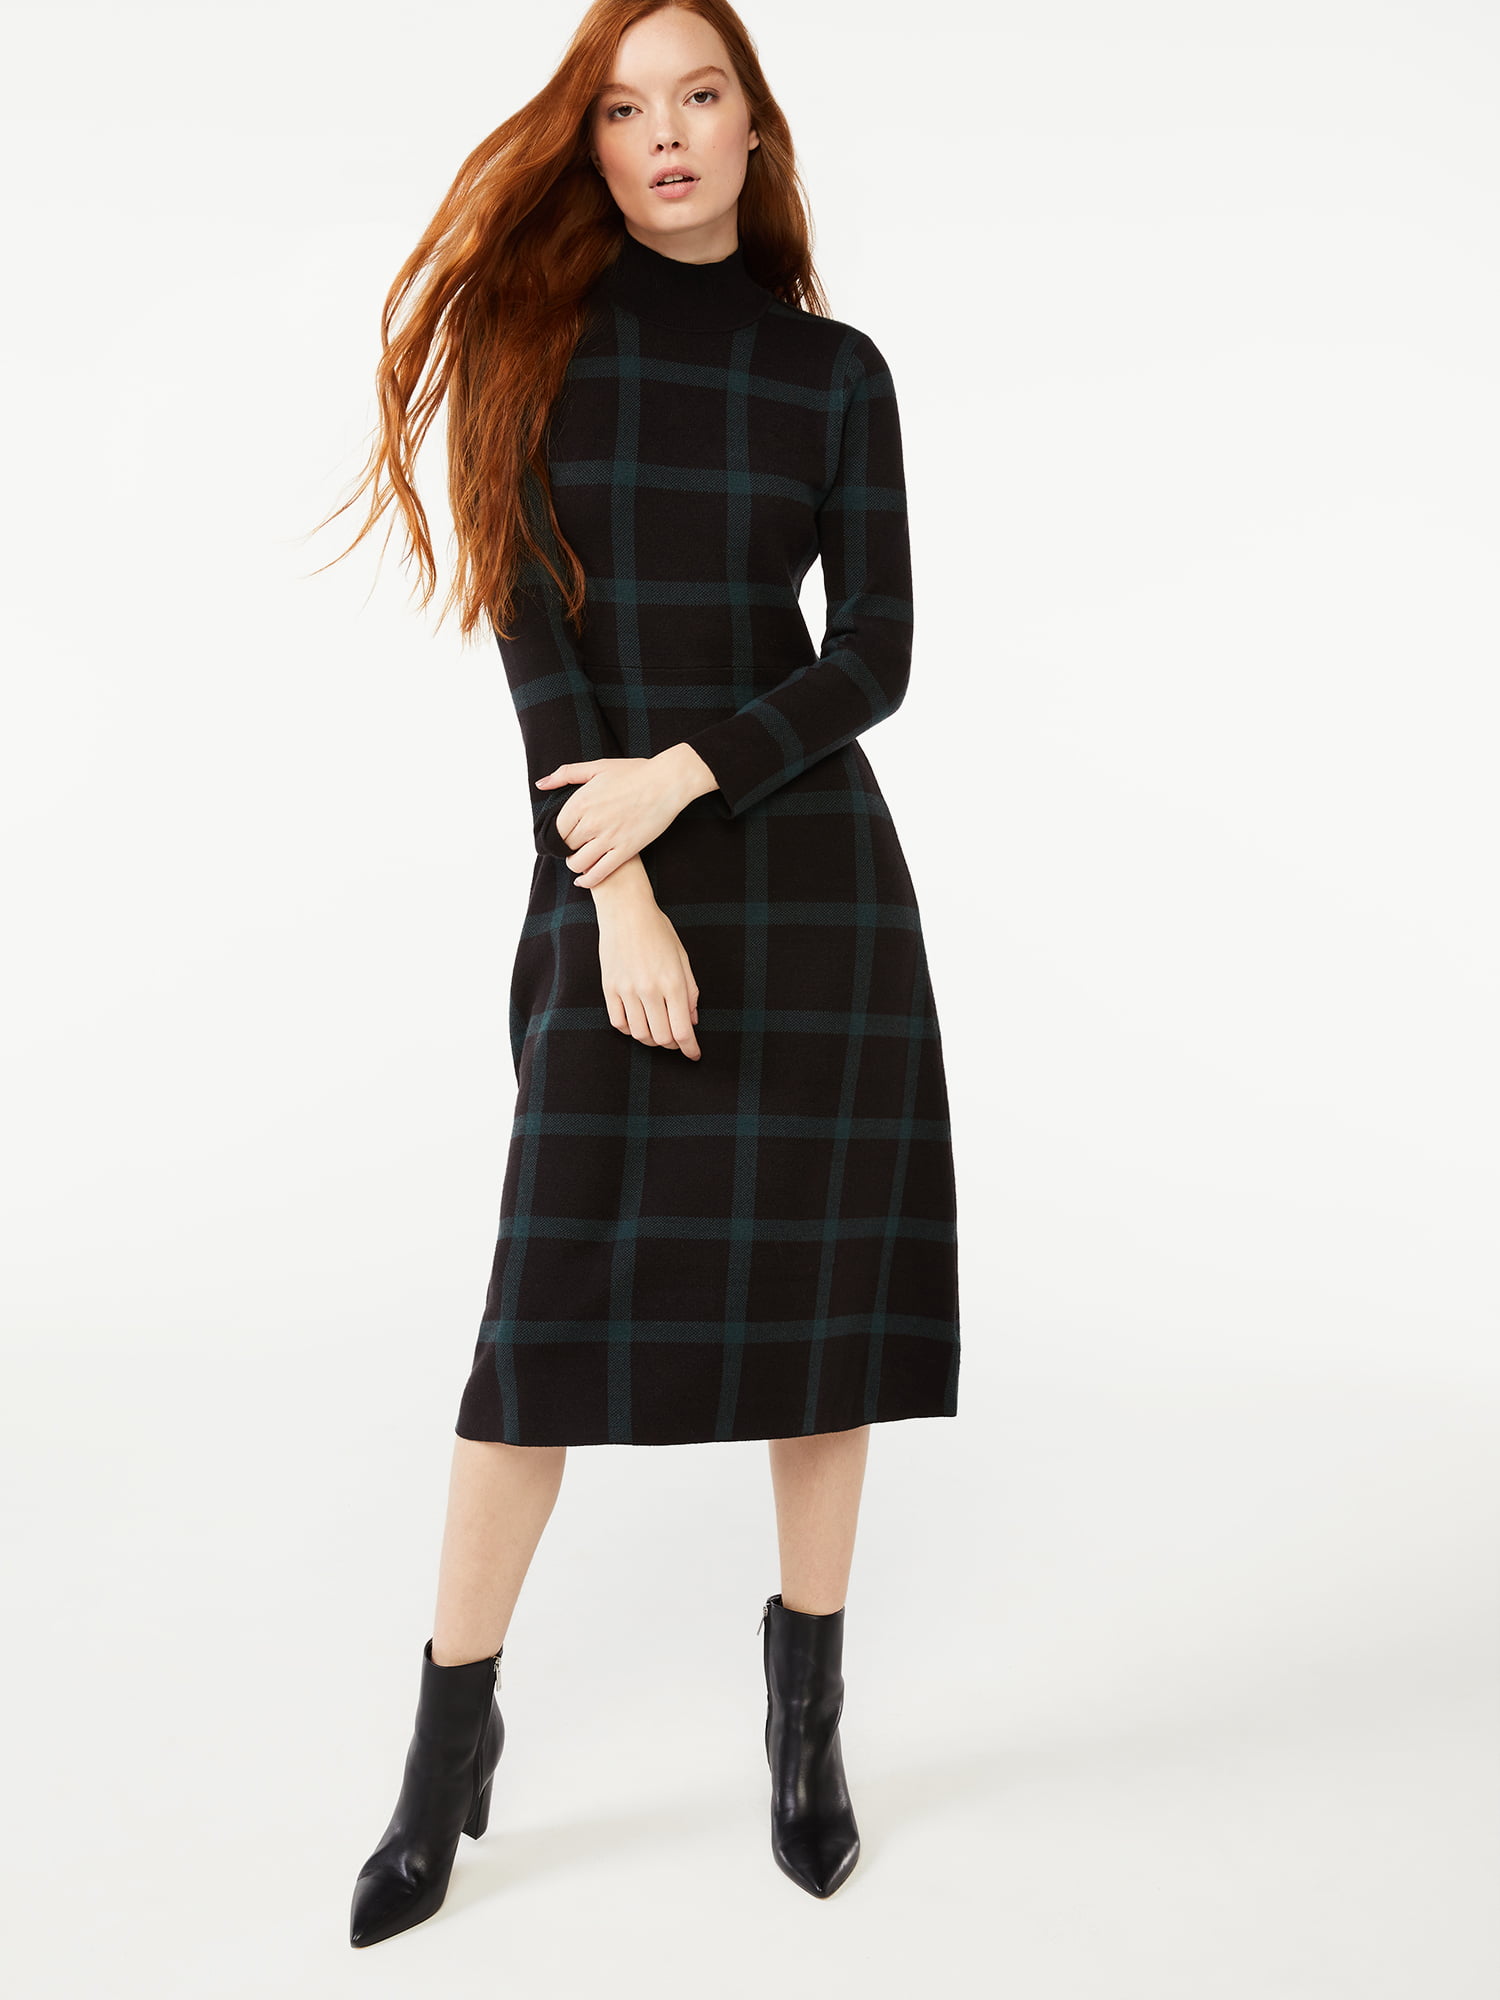 Free Assembly Women's Turtleneck Fit and Flare Sweater Dress - Walmart.com